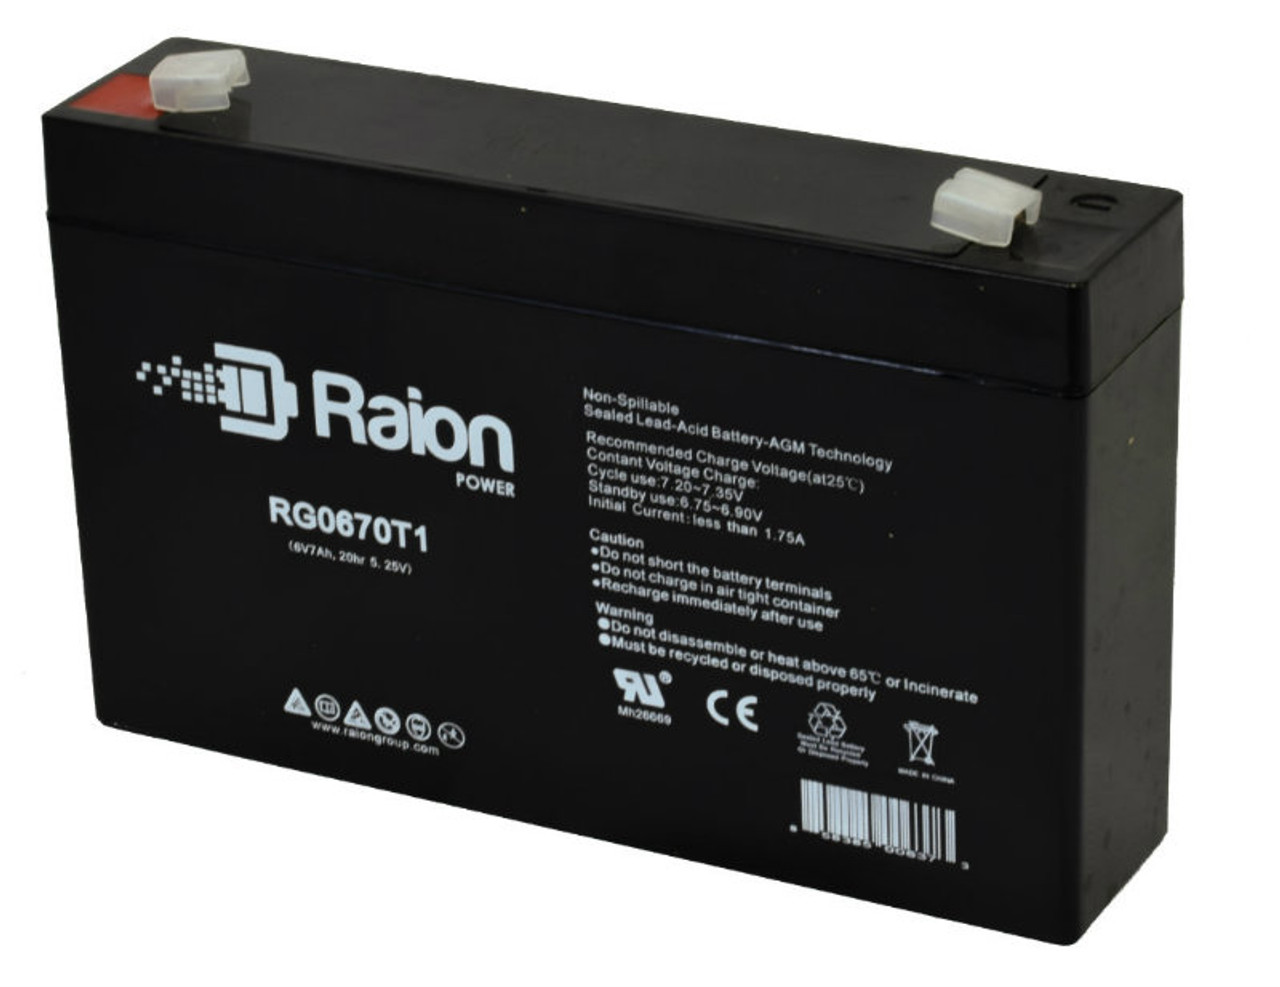 Raion Power RG0670T1 6V 7Ah Replacement Emergency Lighting Battery for Dual-Lite EZ-2I (Current)